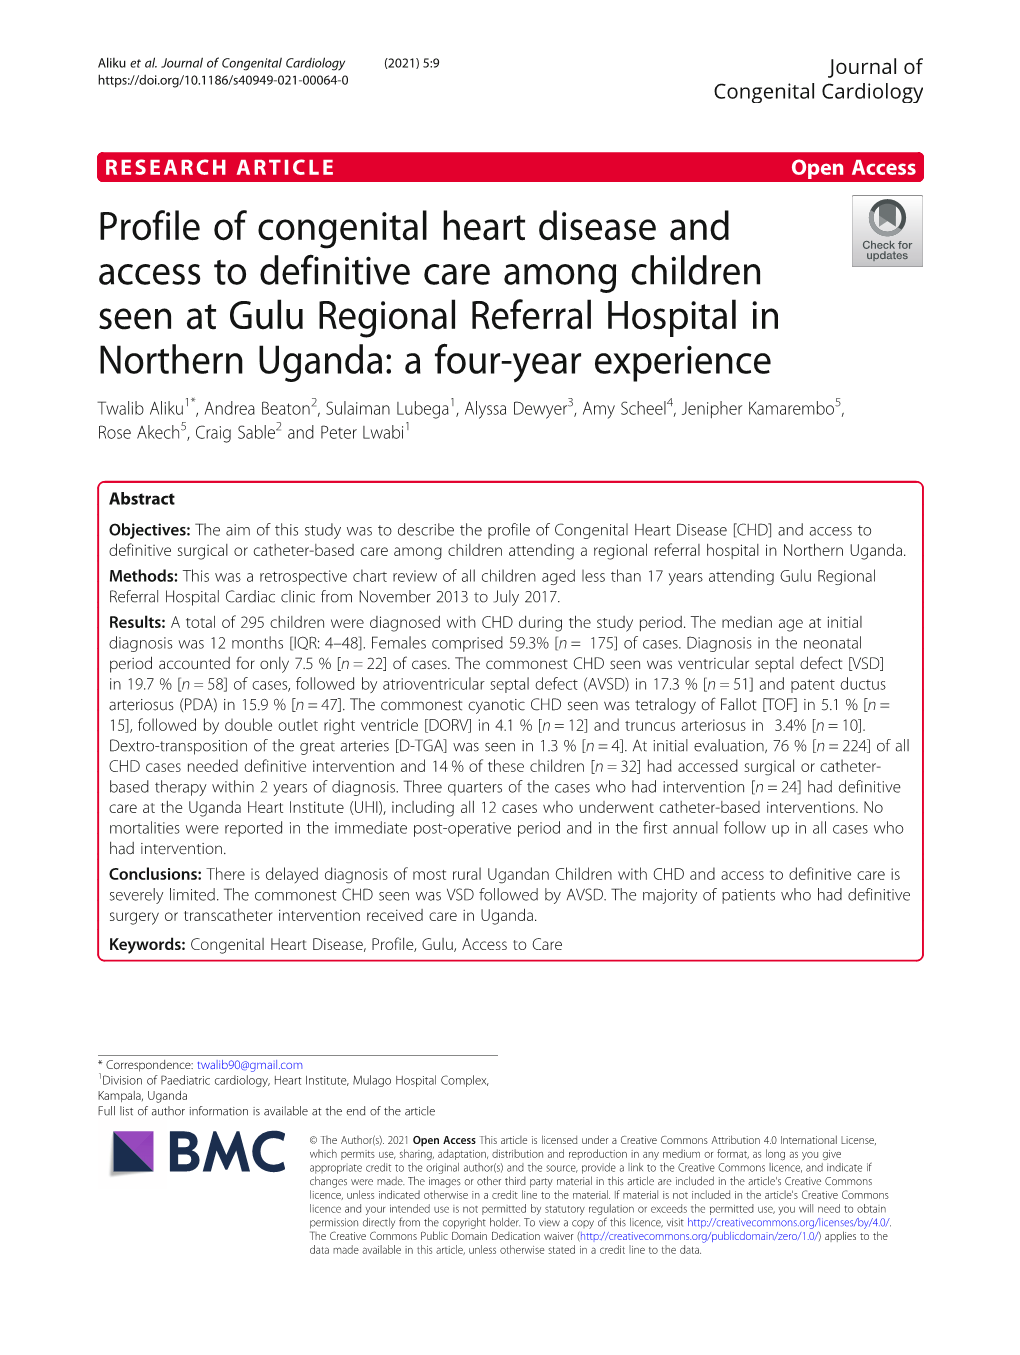 Profile of Congenital Heart Disease and Access to Definitive Care Among